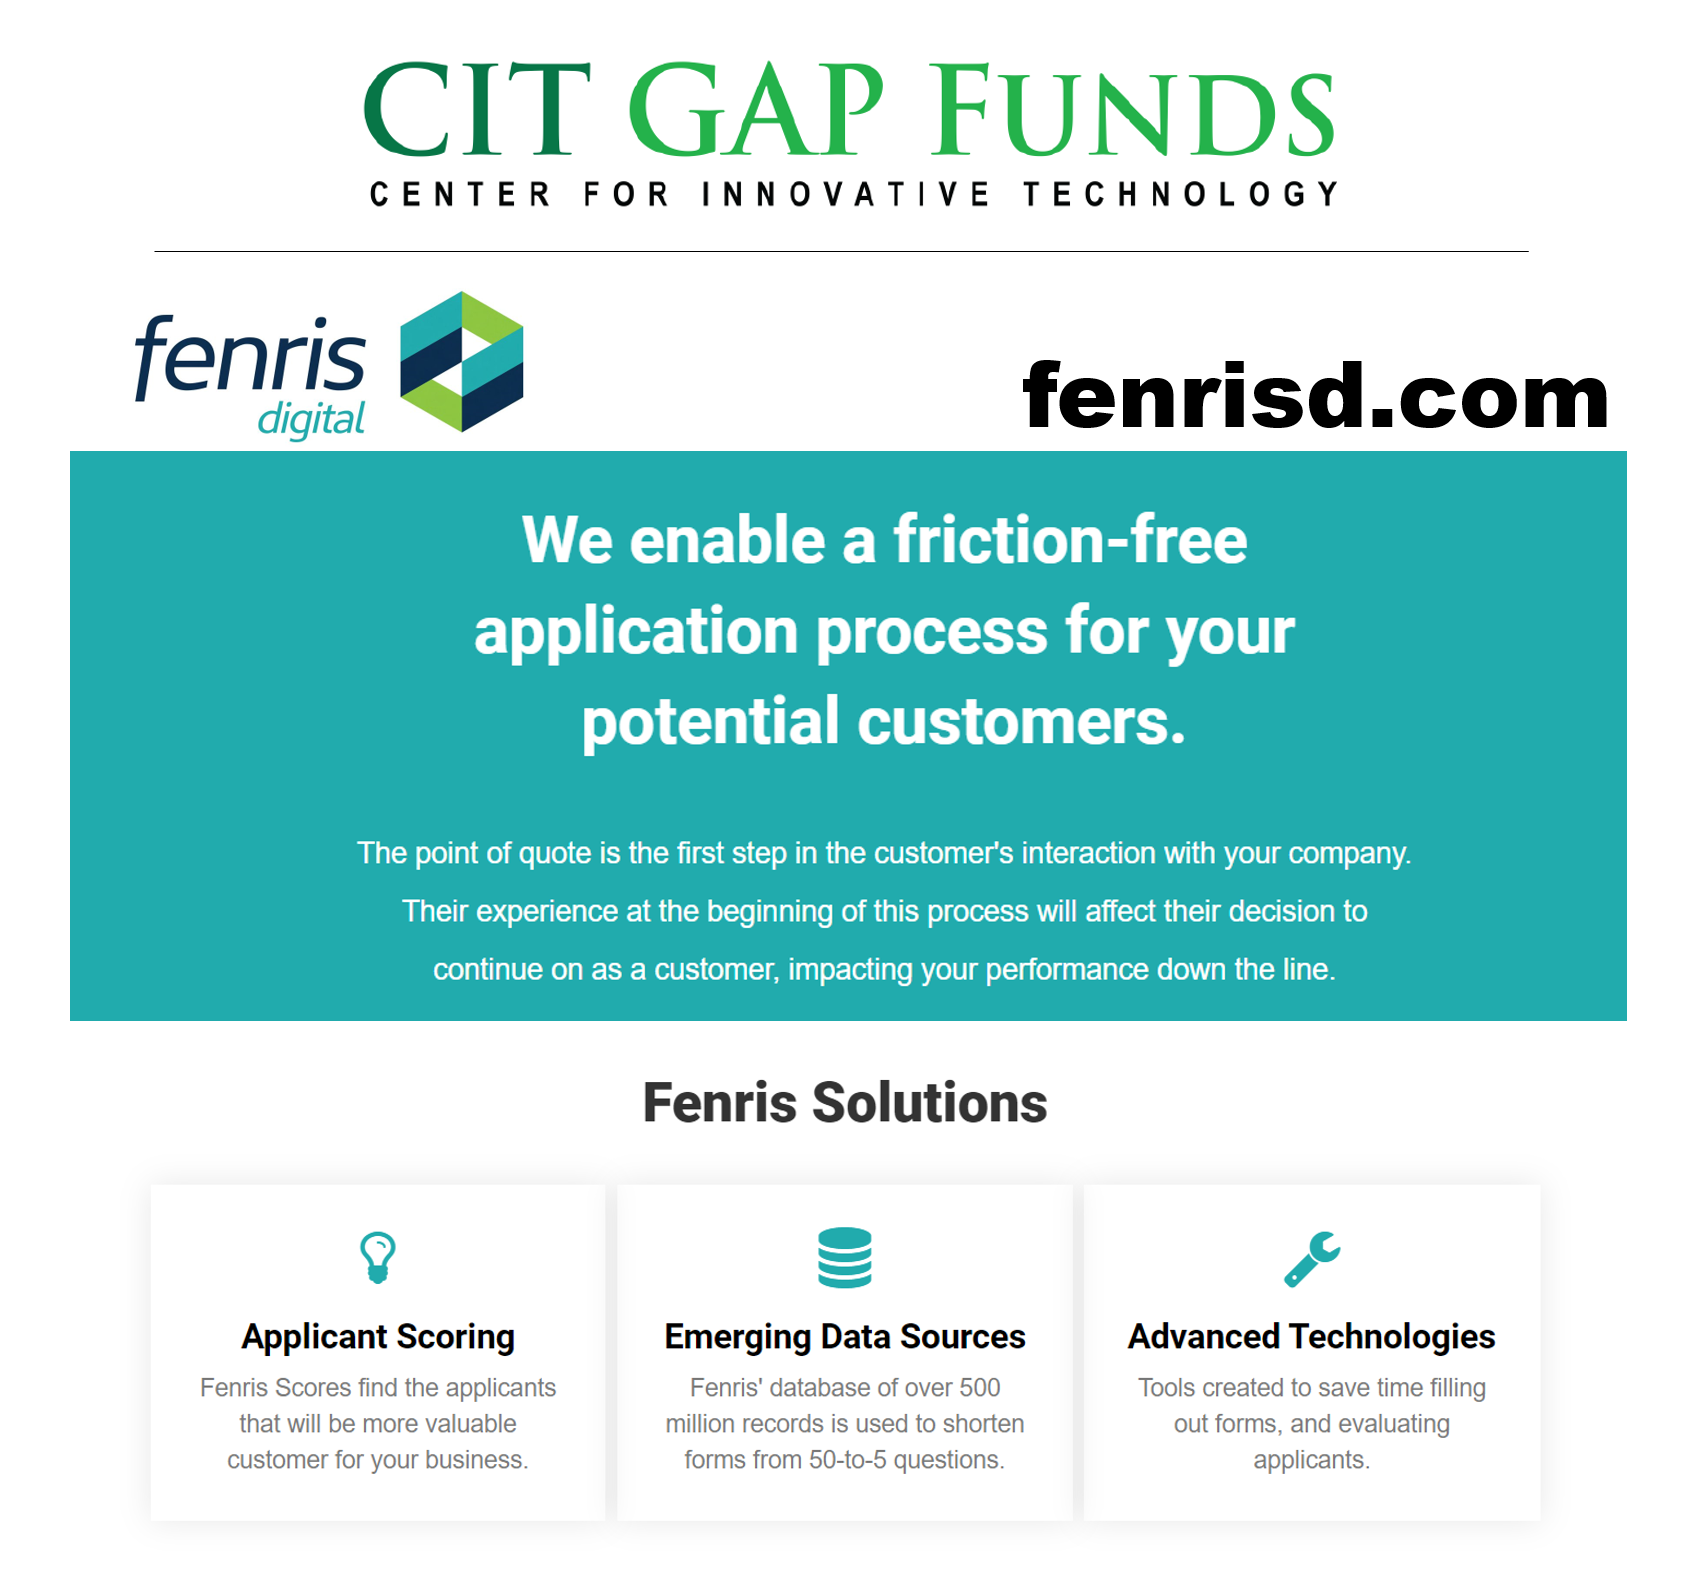 The Center for Innovative Technology (CIT) today announced that CIT GAP Funds, with funds also coming from the Virginia Founders Fund, has invested in Richmond, Va.-based Fenris. 